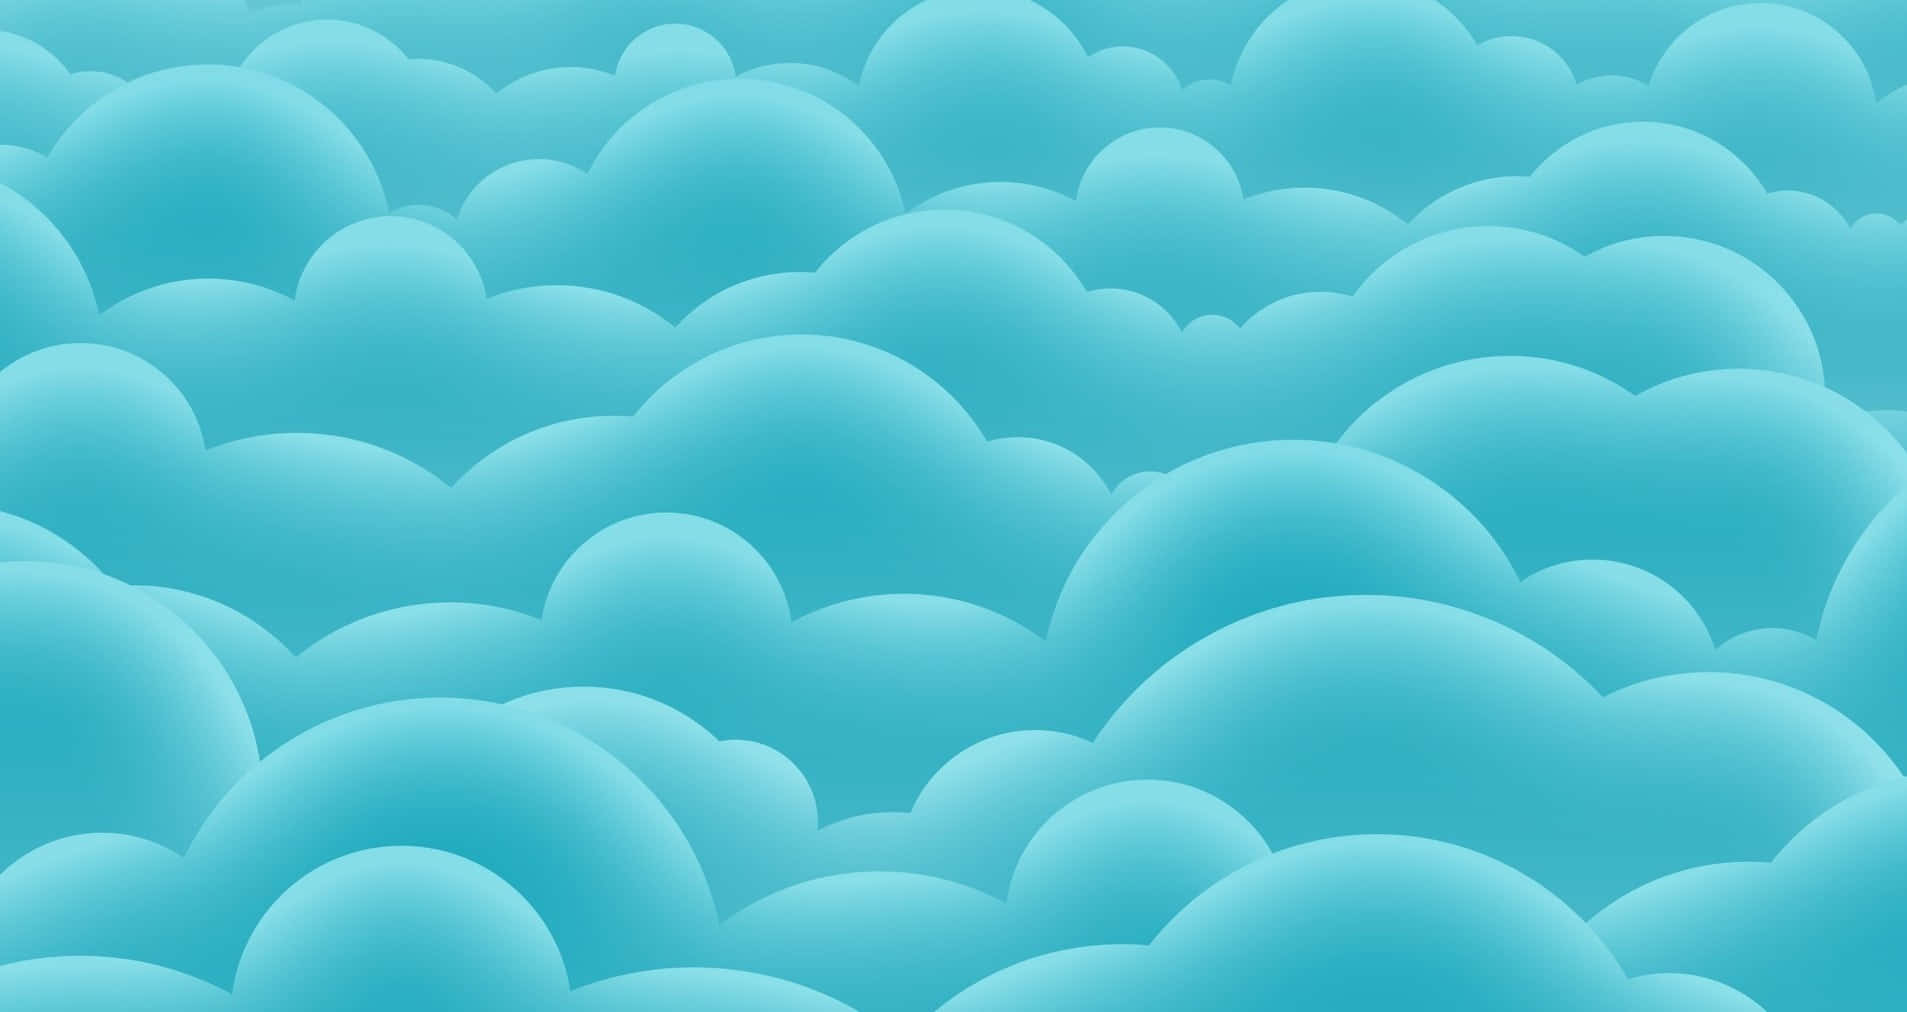 A Blue Background With Clouds In The Sky